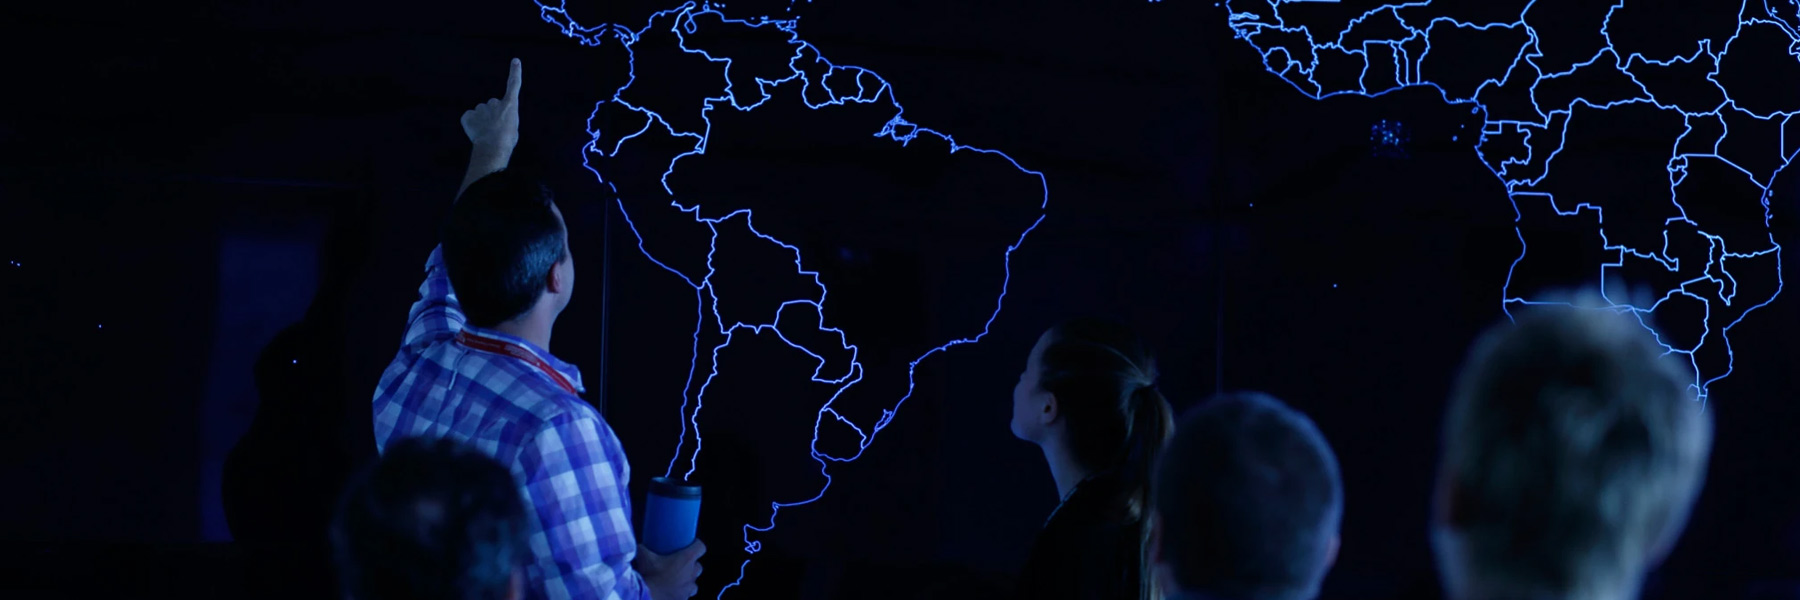 A dramatic darkly lit photograph of a man pointing to a spot on a world map in front of a crowd. 